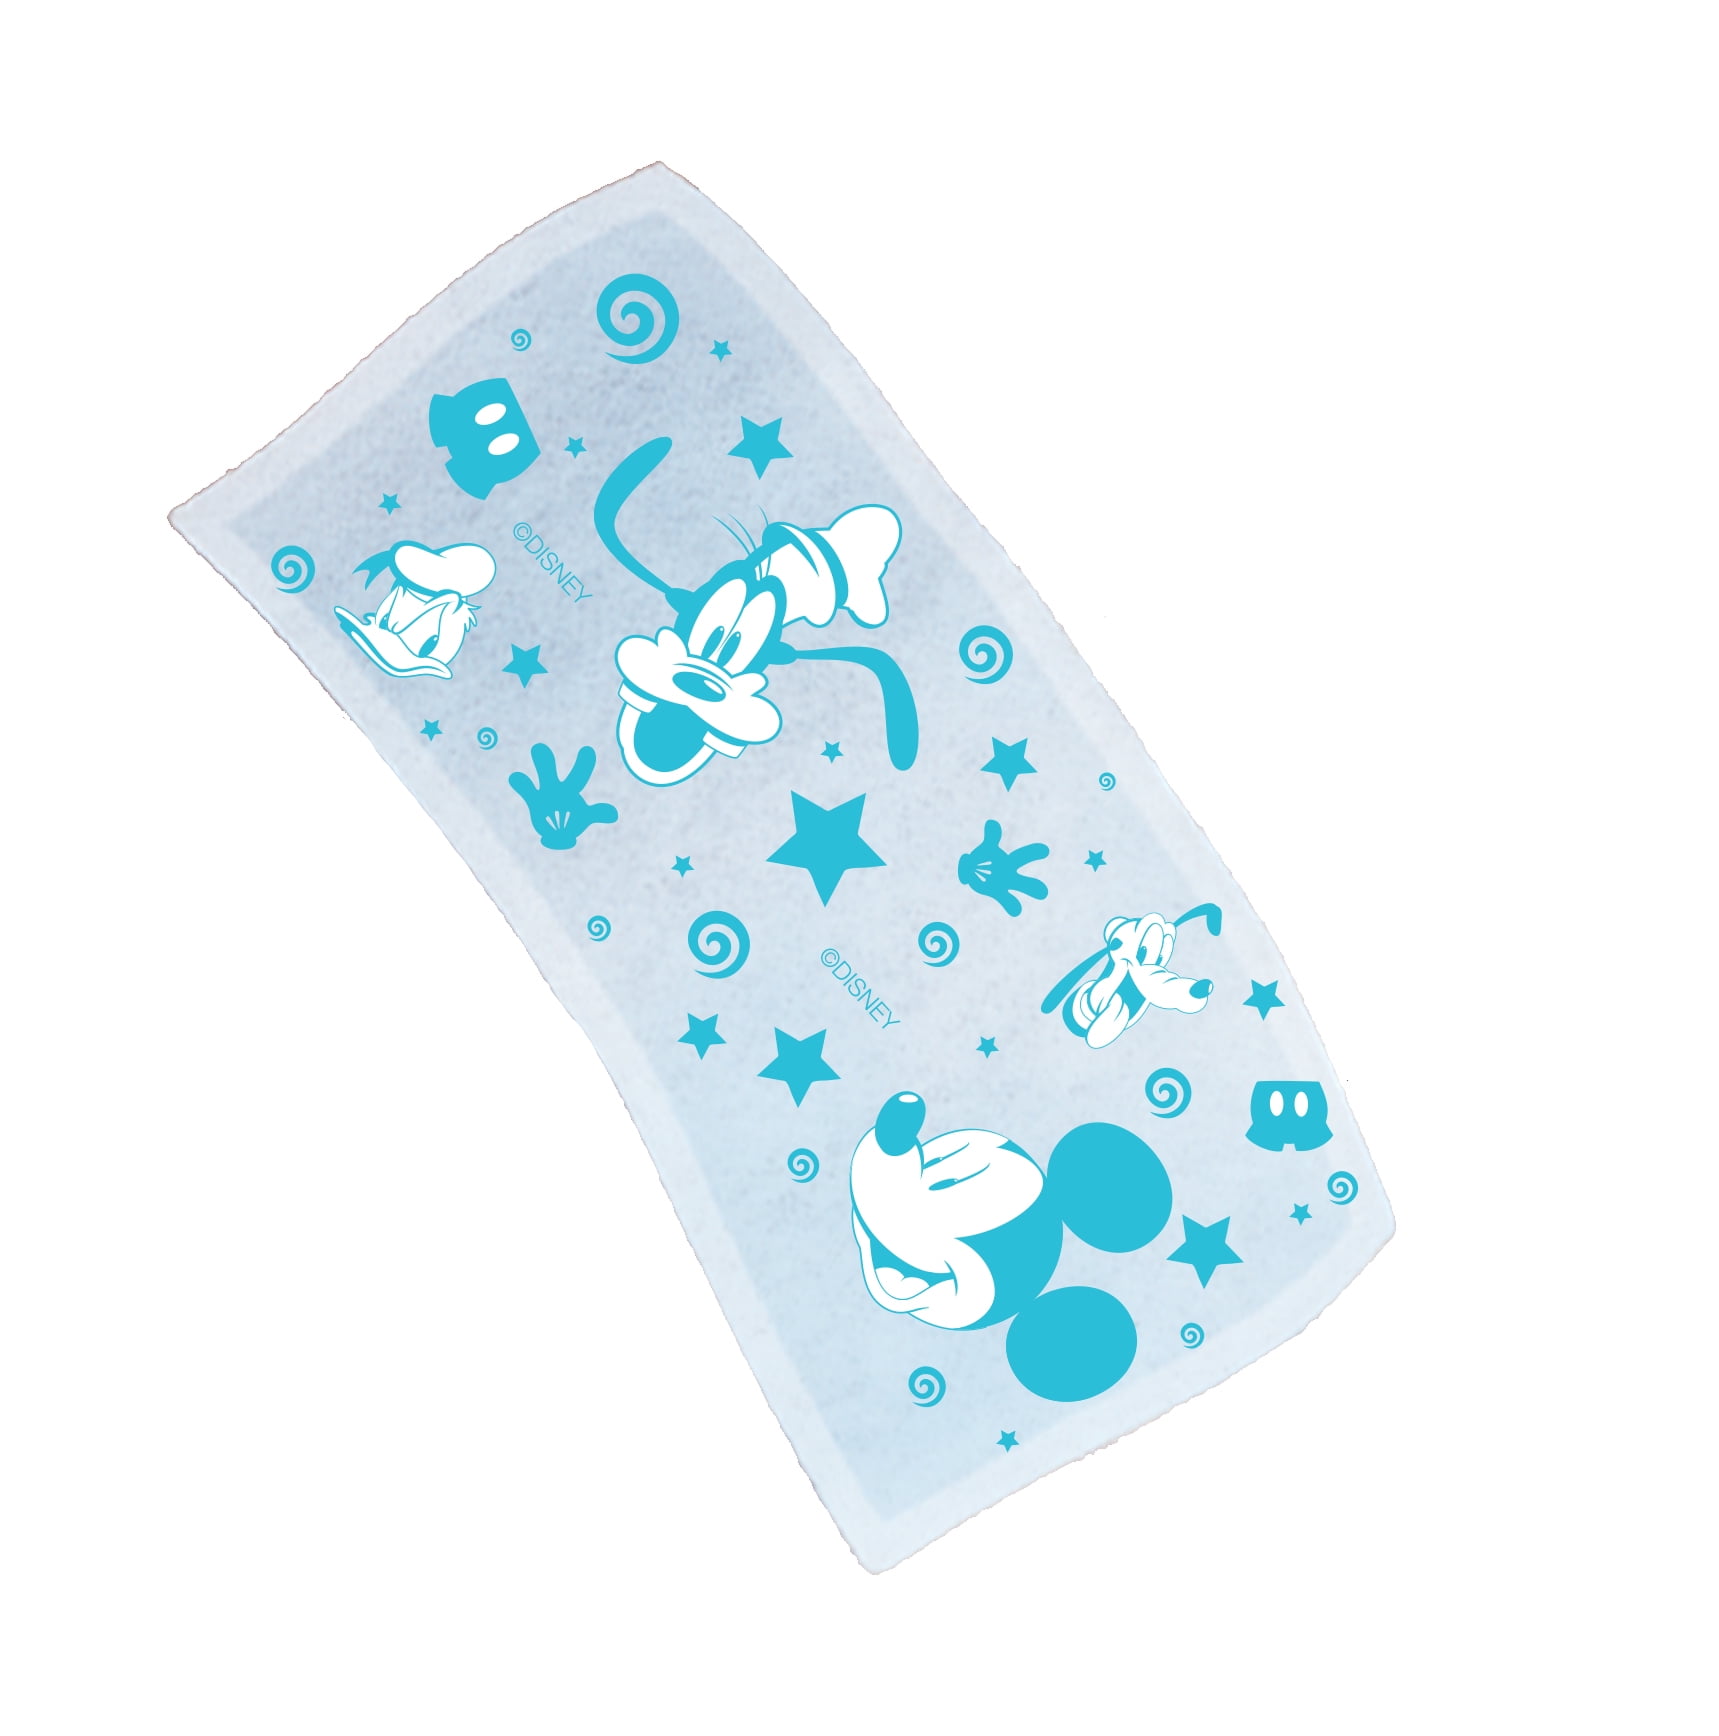 16 Sheets Baby Cool Pads for Kids Fever Discomfort & Pain Relief